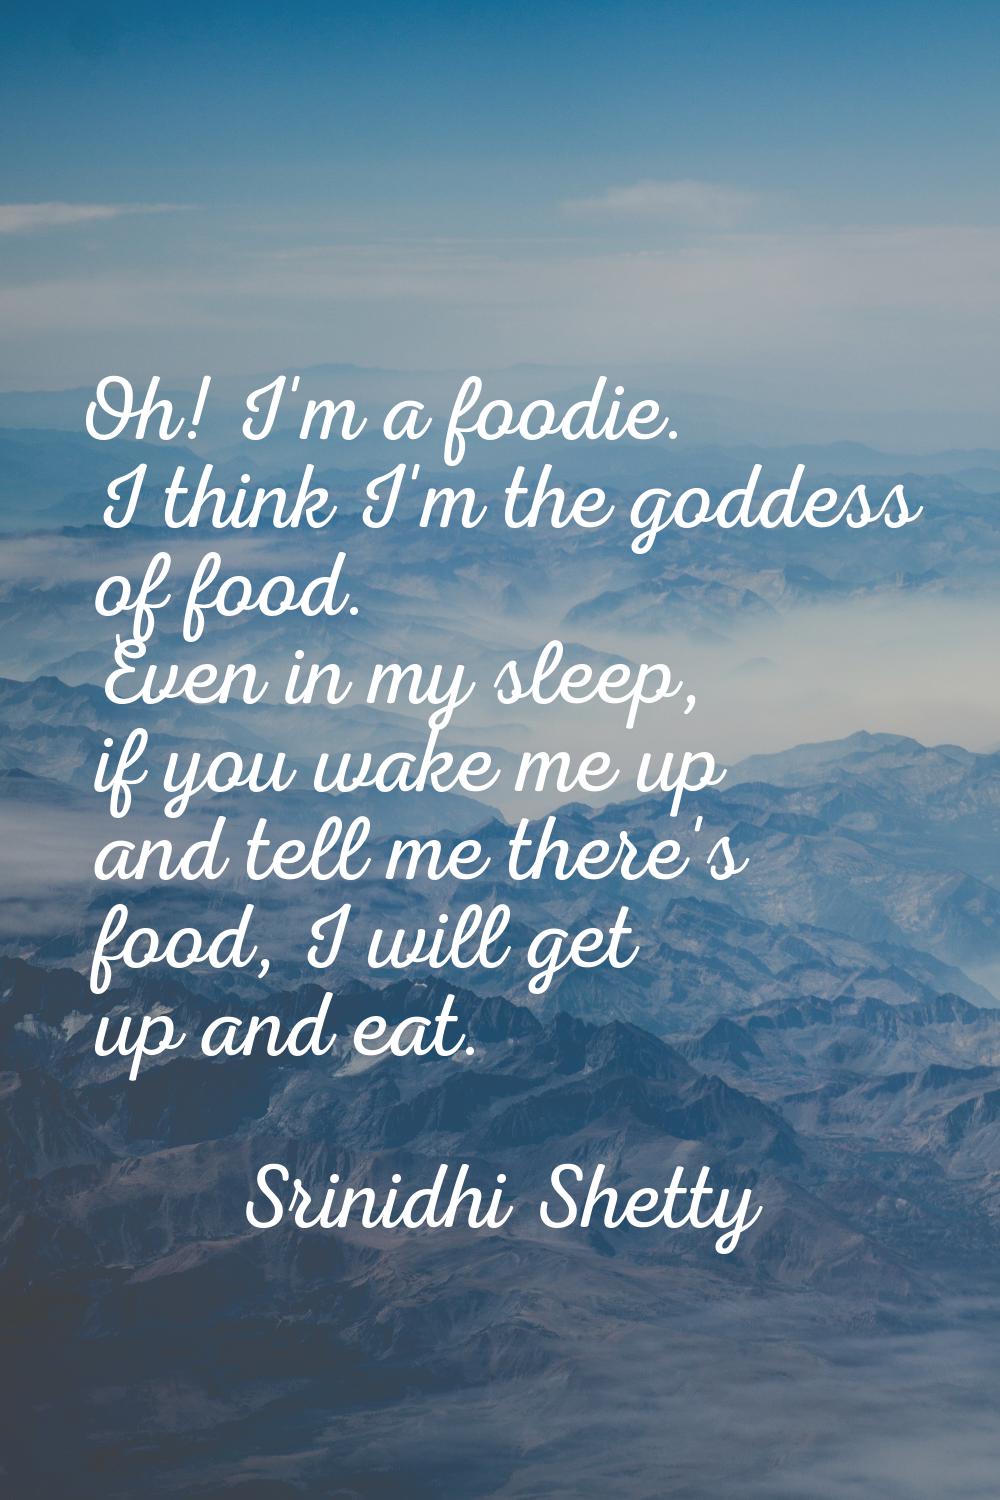 Oh! I'm a foodie. I think I'm the goddess of food. Even in my sleep, if you wake me up and tell me 